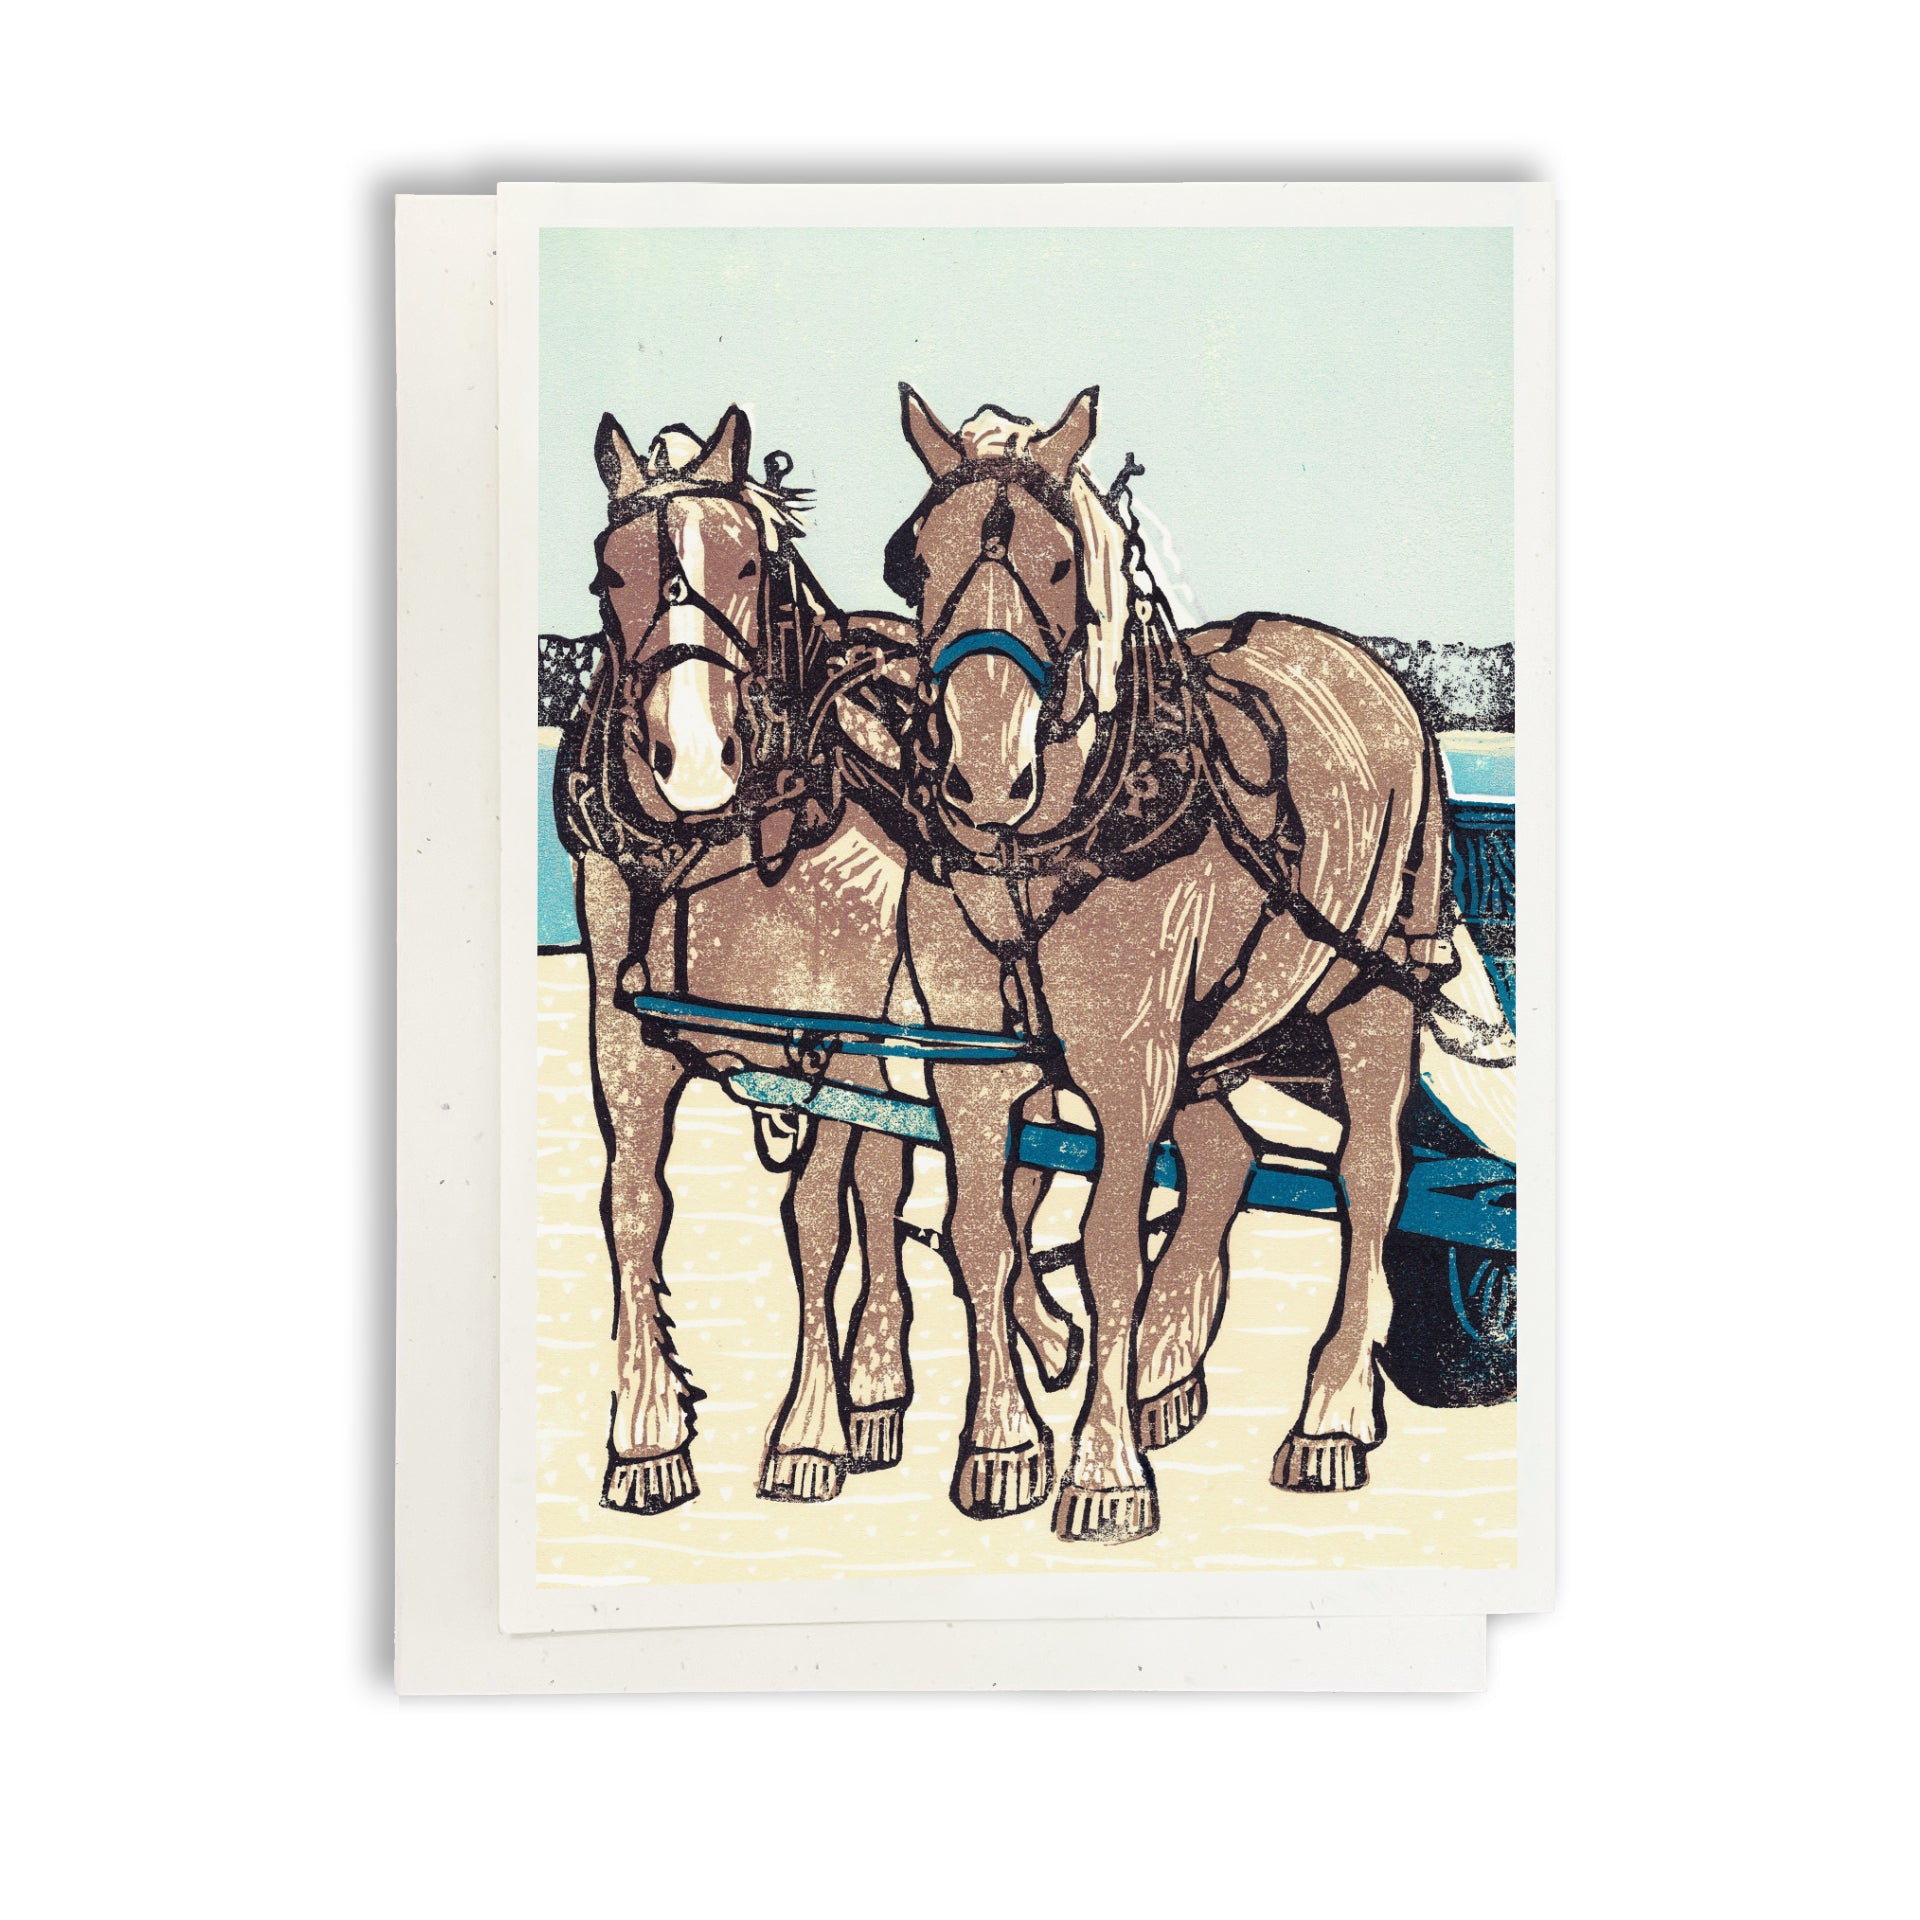 A casually elegant card featuring horse art by Natalia Wohletz titled Dray Team on the Dock.